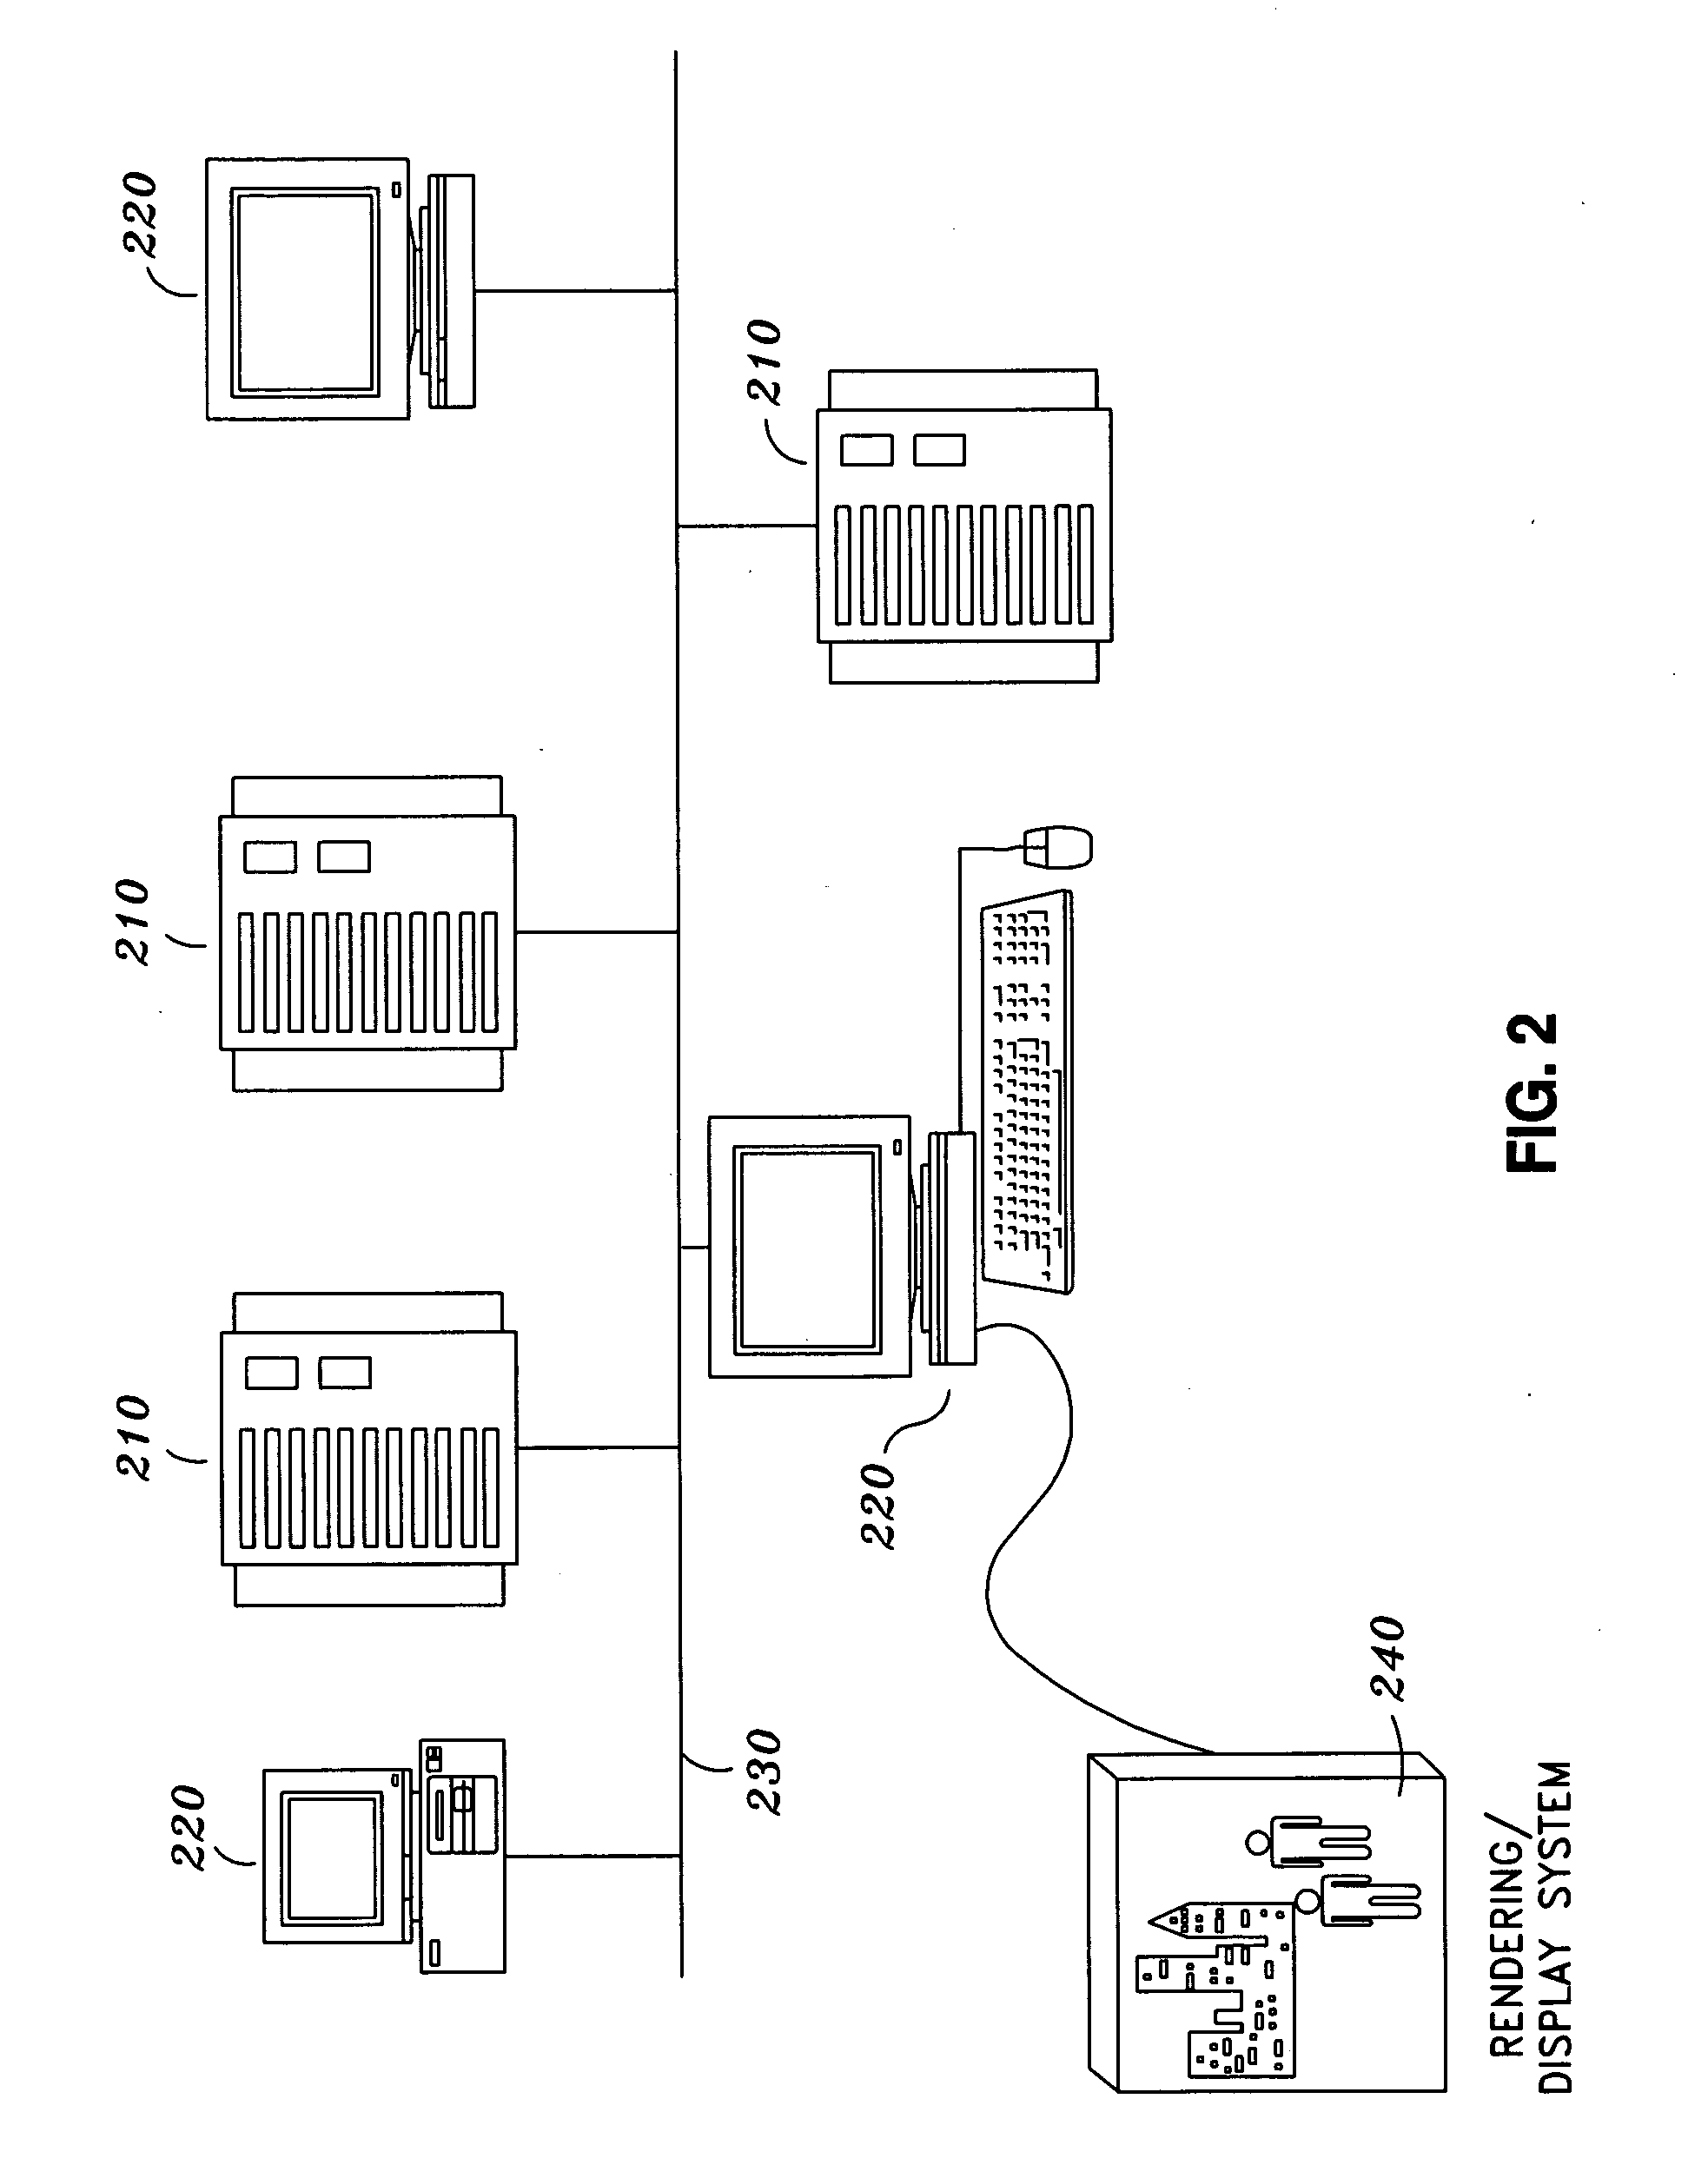 Method and system for intelligent scalable animation with intelligent parallel processing engine and intelligent animation engine